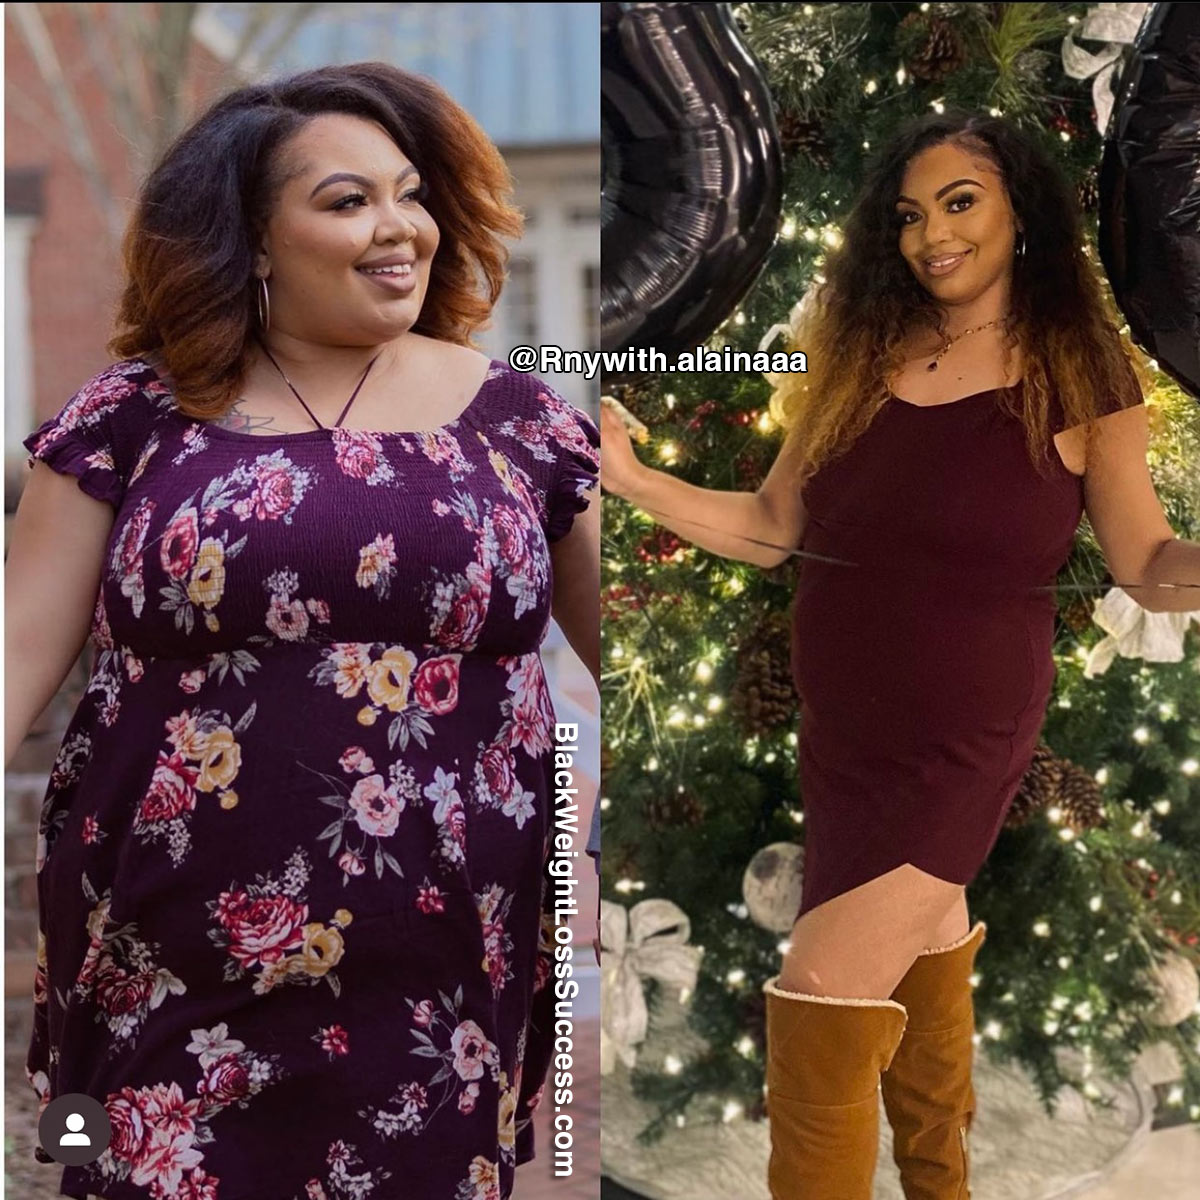 Alaina before and after weight loss